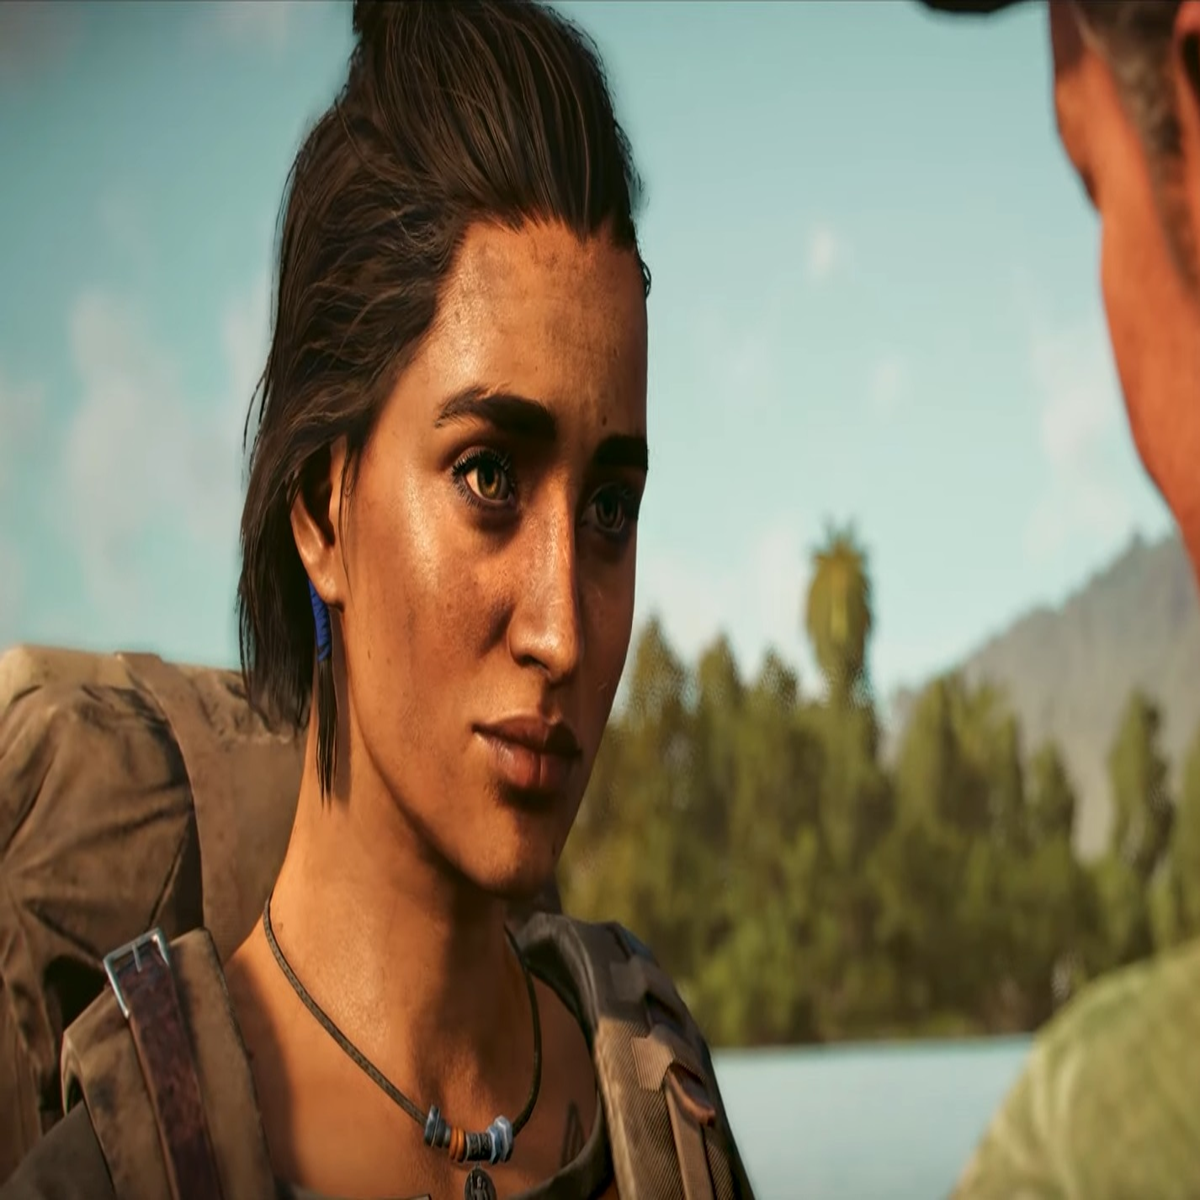 Far Cry 6 is finally heading to Steam this month